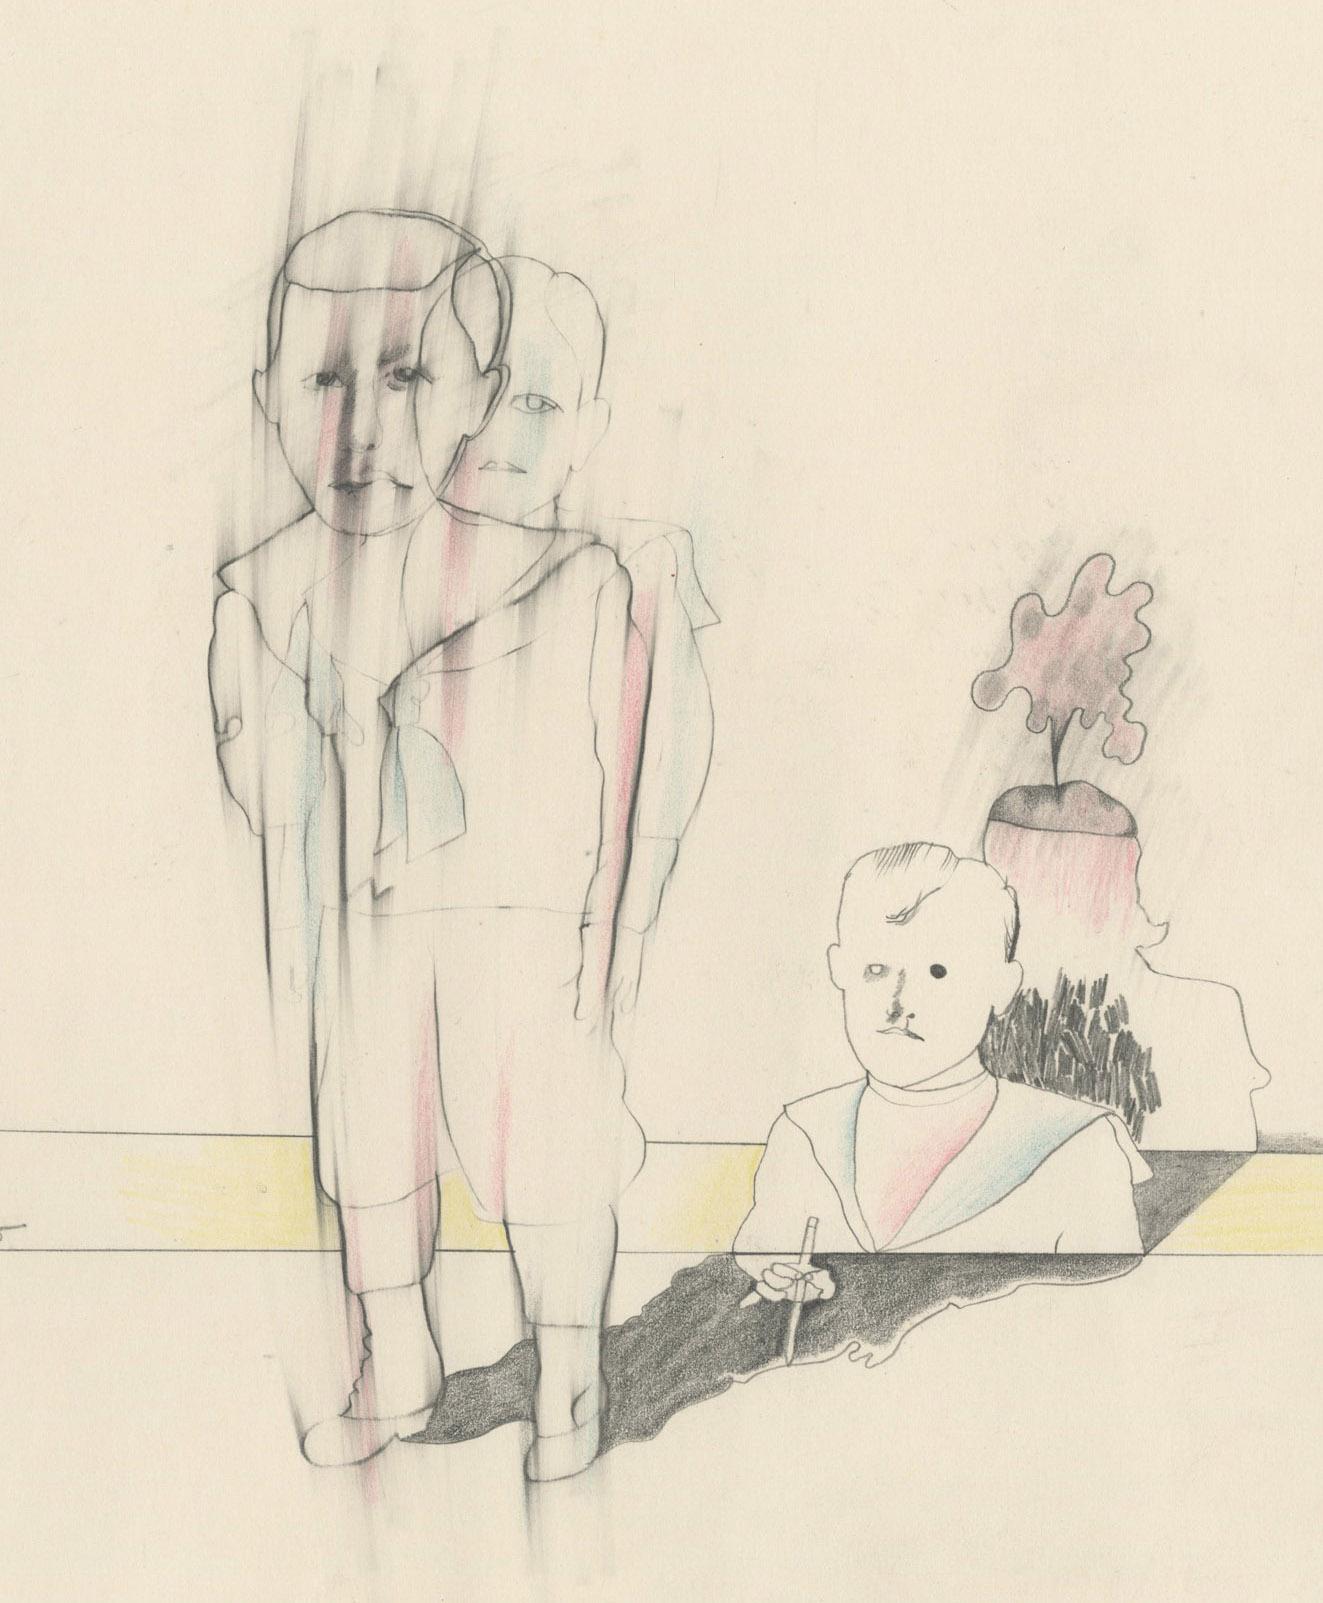 Two Boys (one standing, the other seated and drawing)
Graphite and colored pencils on wove paper, 1975
Signed and dated lower left center (see photo)
Condition: Excellent
                  Slight waviness visible only on reverse
Image size: 11 1/2 x